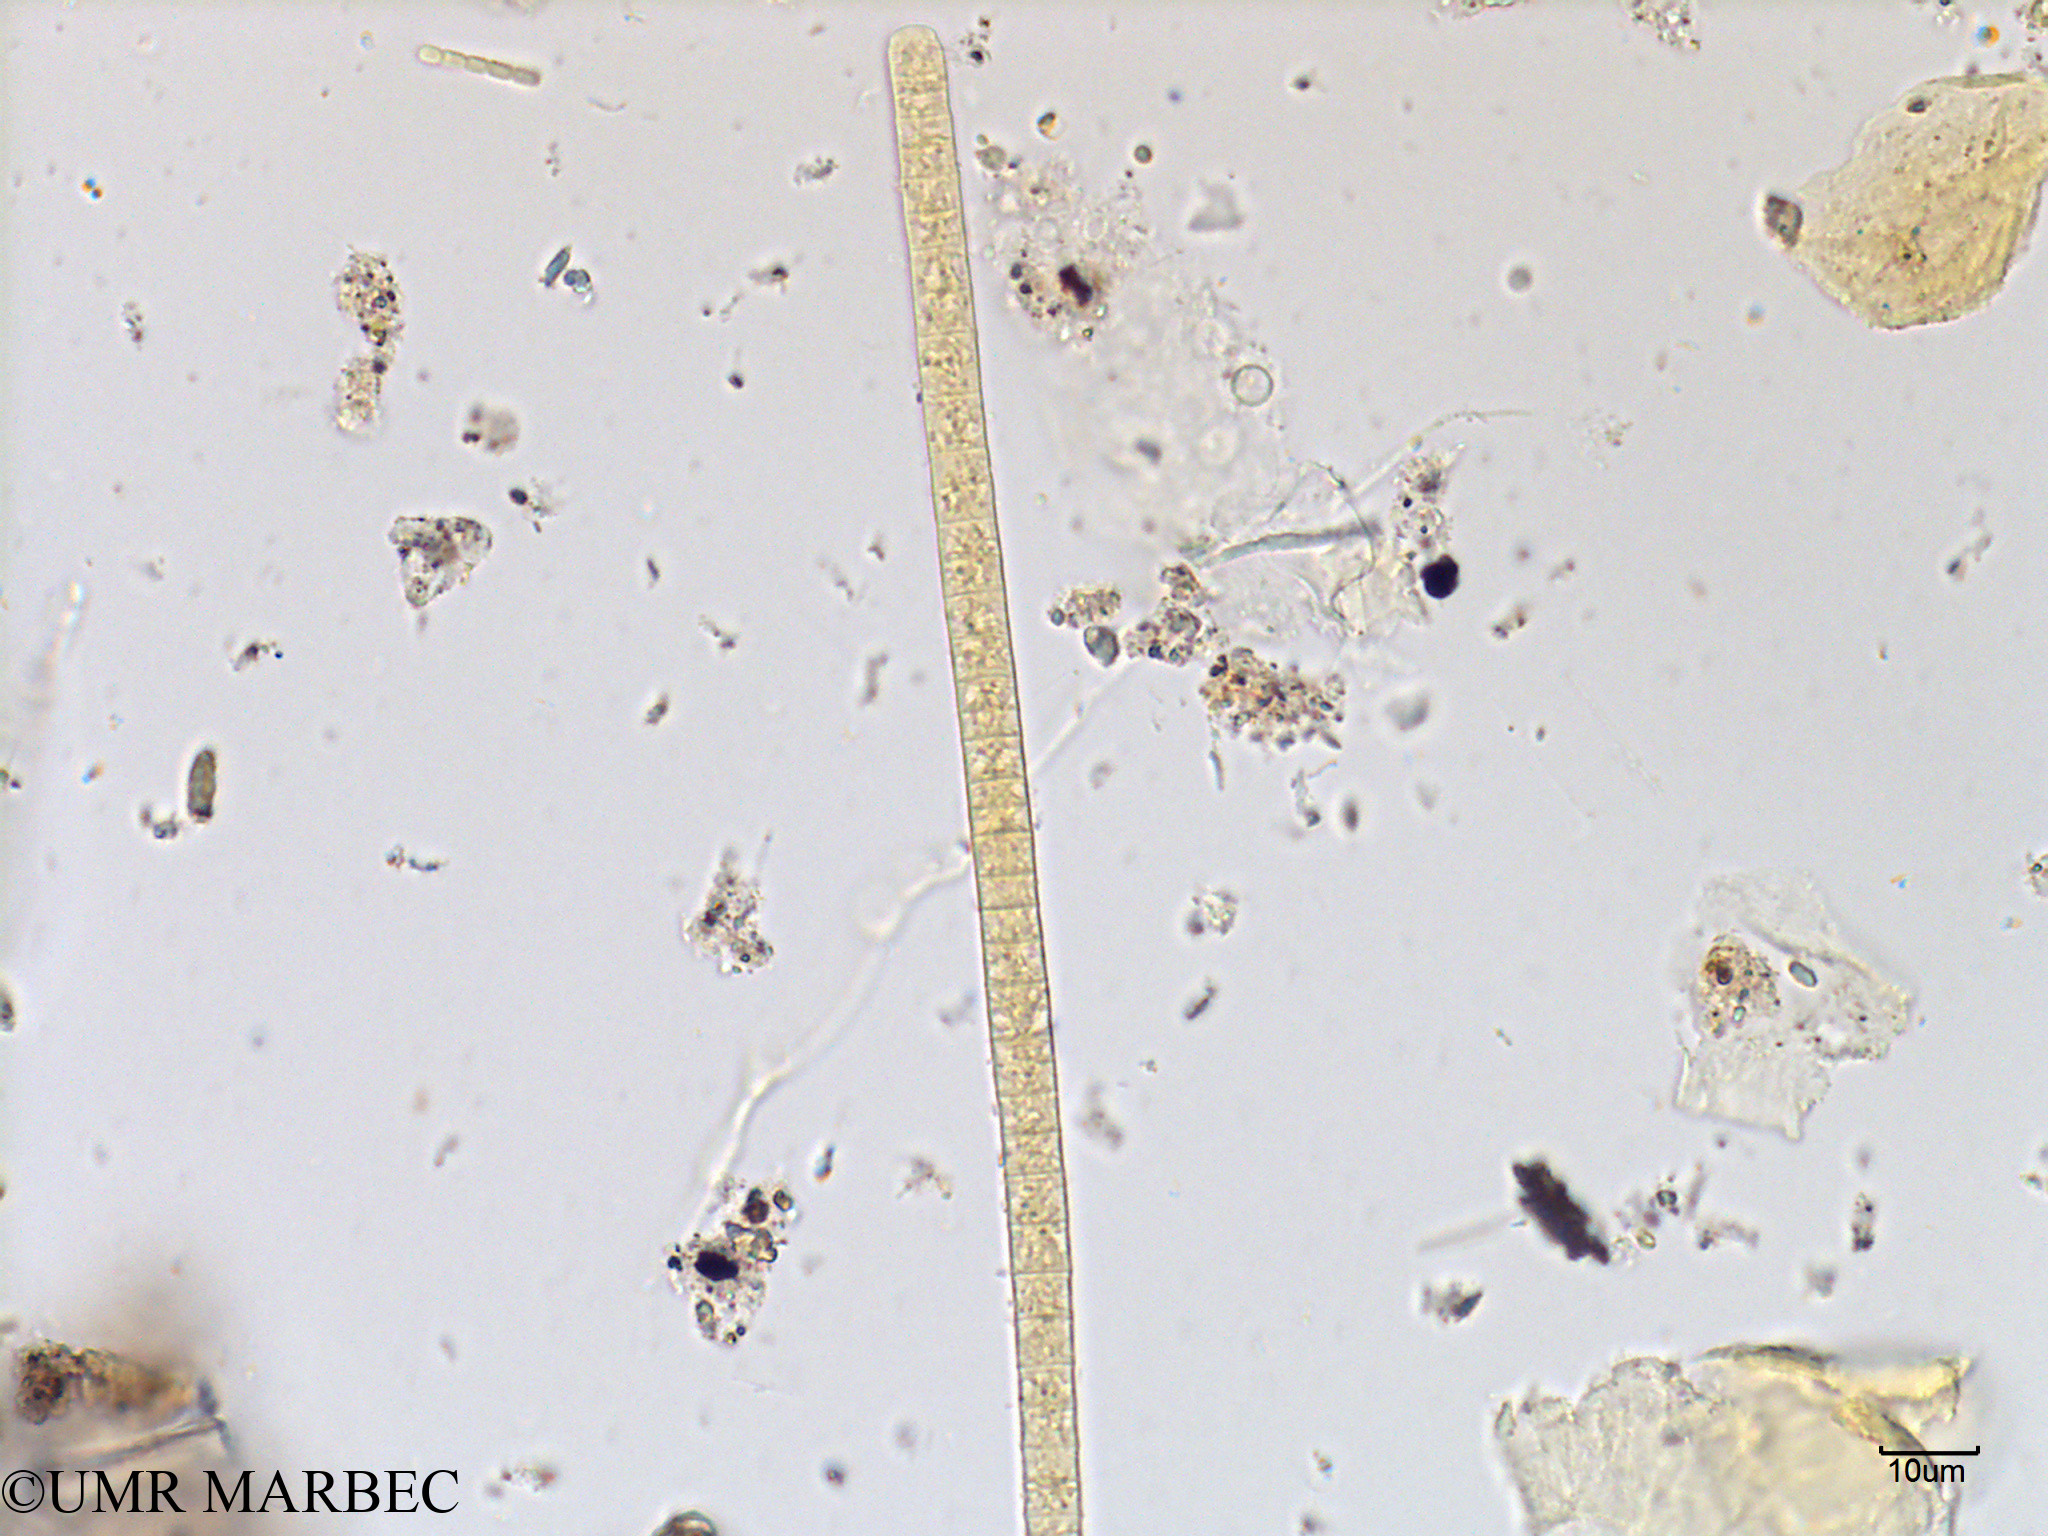 phyto/Scattered_Islands/mayotte_lagoon/SIREME May 2016/Trichodesmium sp4 (MAY2_trichodesmium-4).tif(copy).jpg